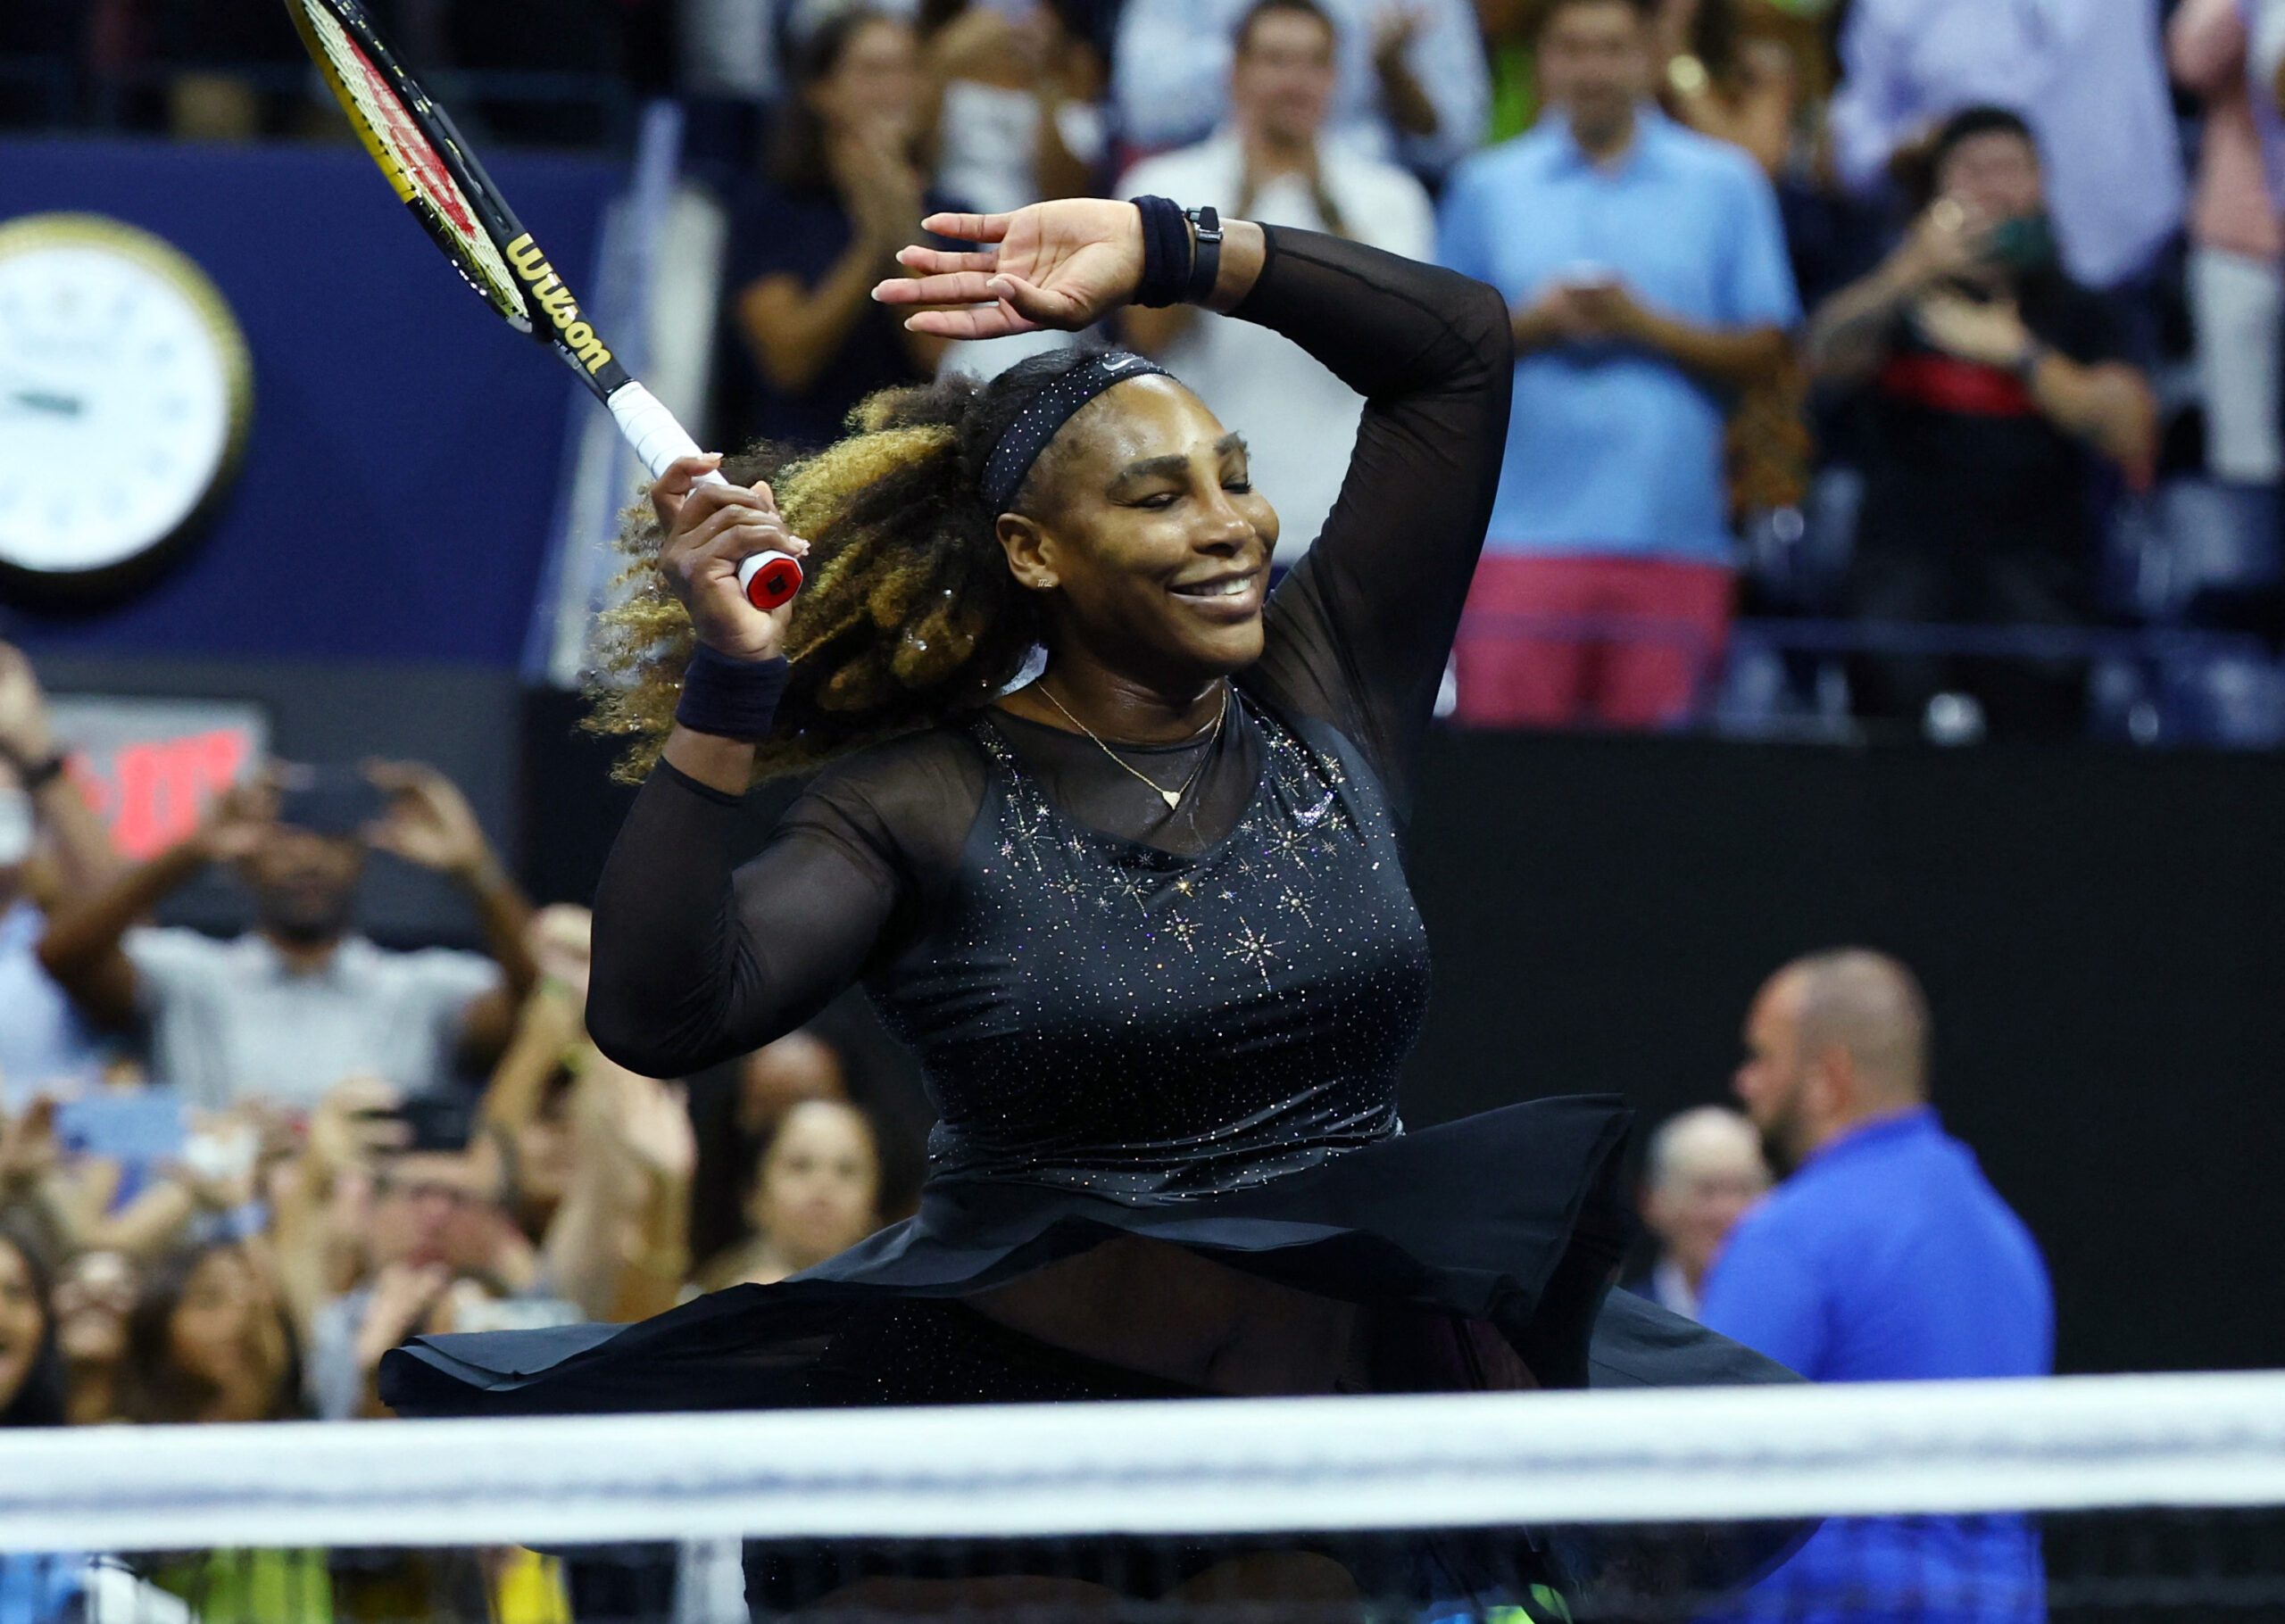 Serena does not rule out return, saying NFL’s Brady started ‘a really cool trend’